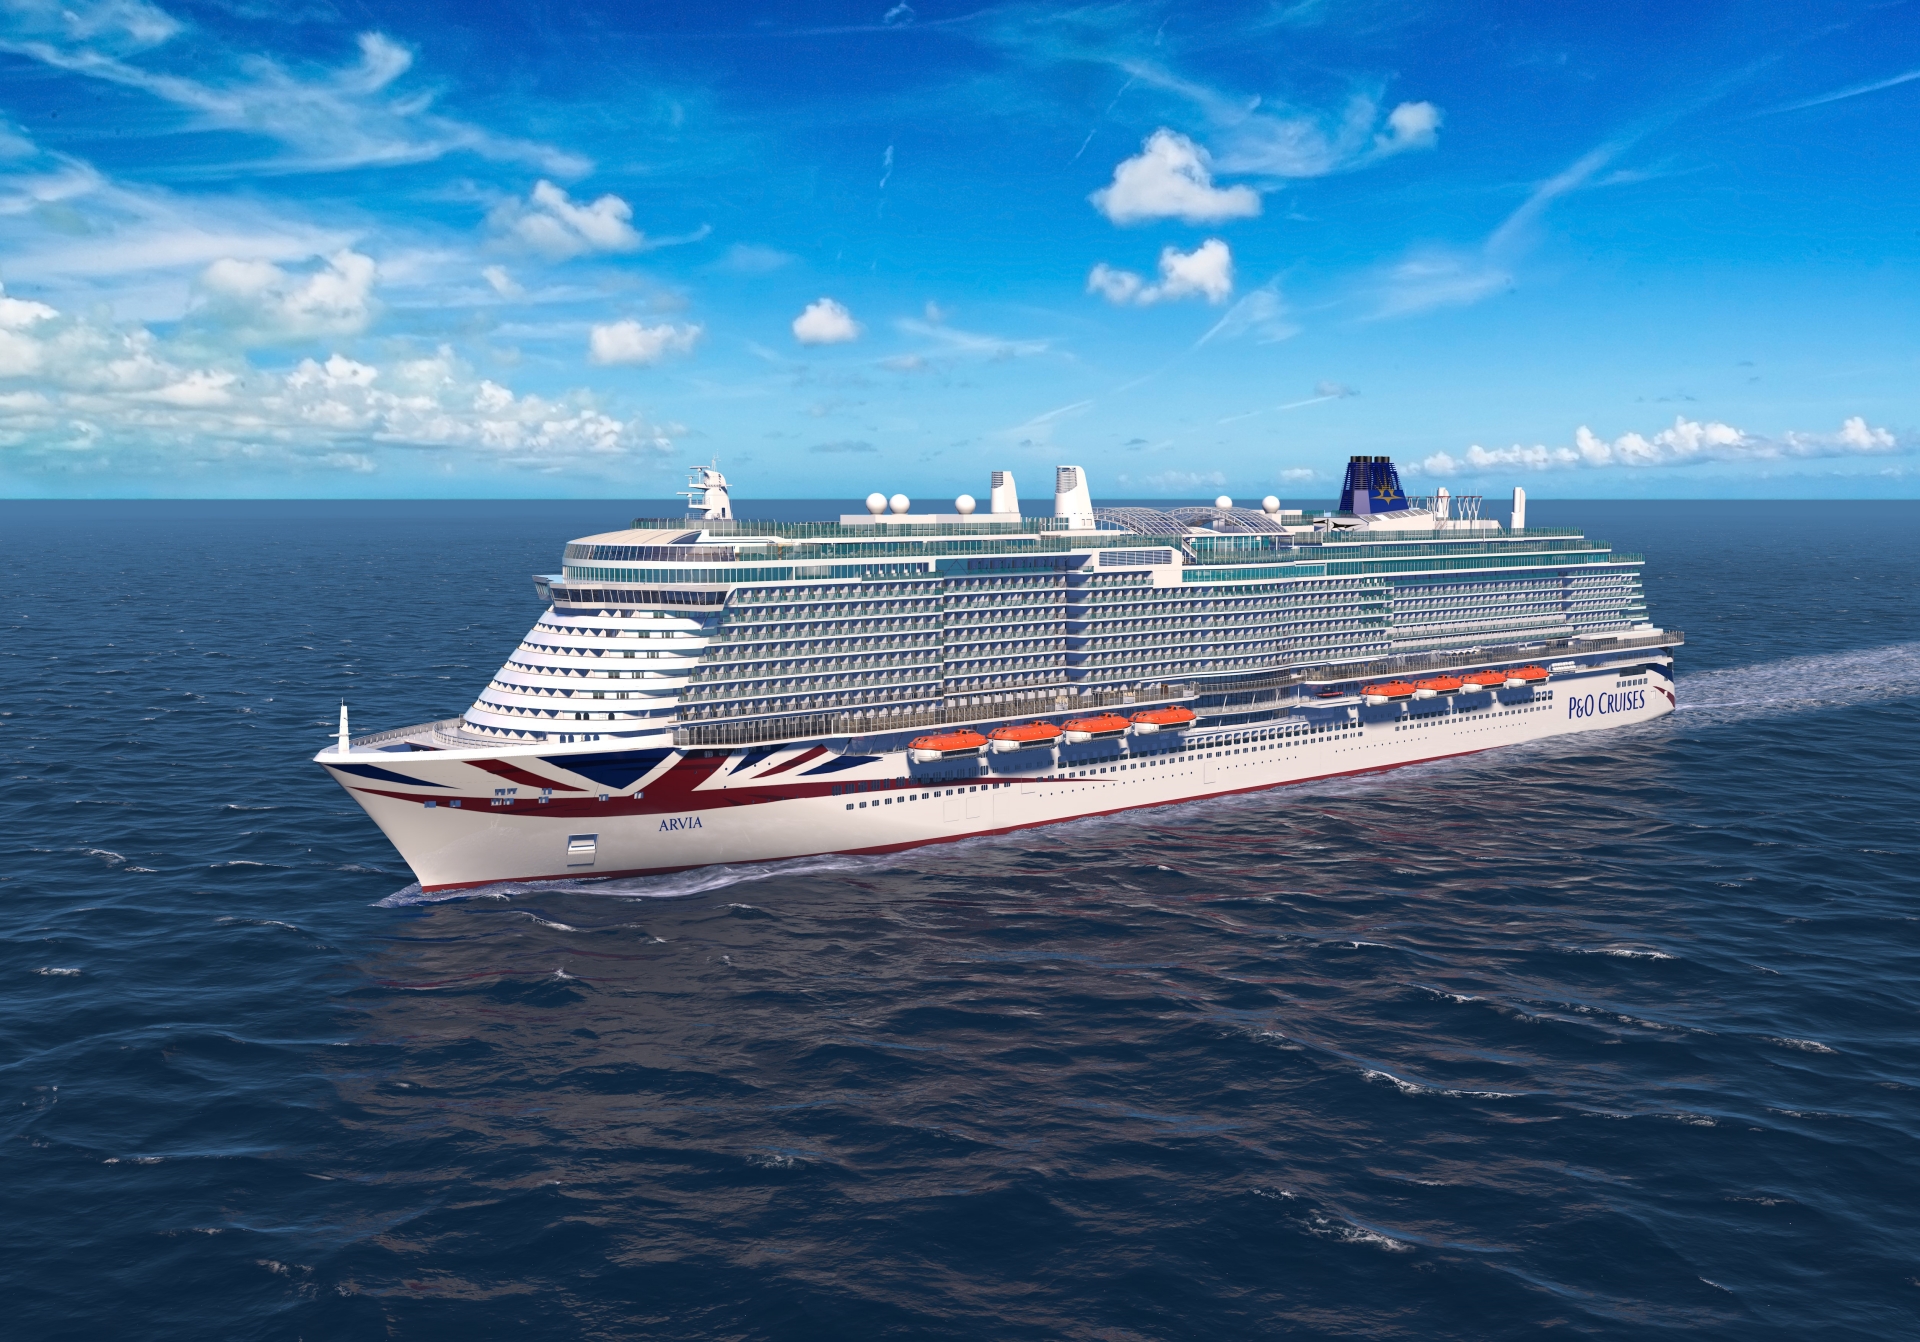 P&O Cruises' second LNG liner named Arvia